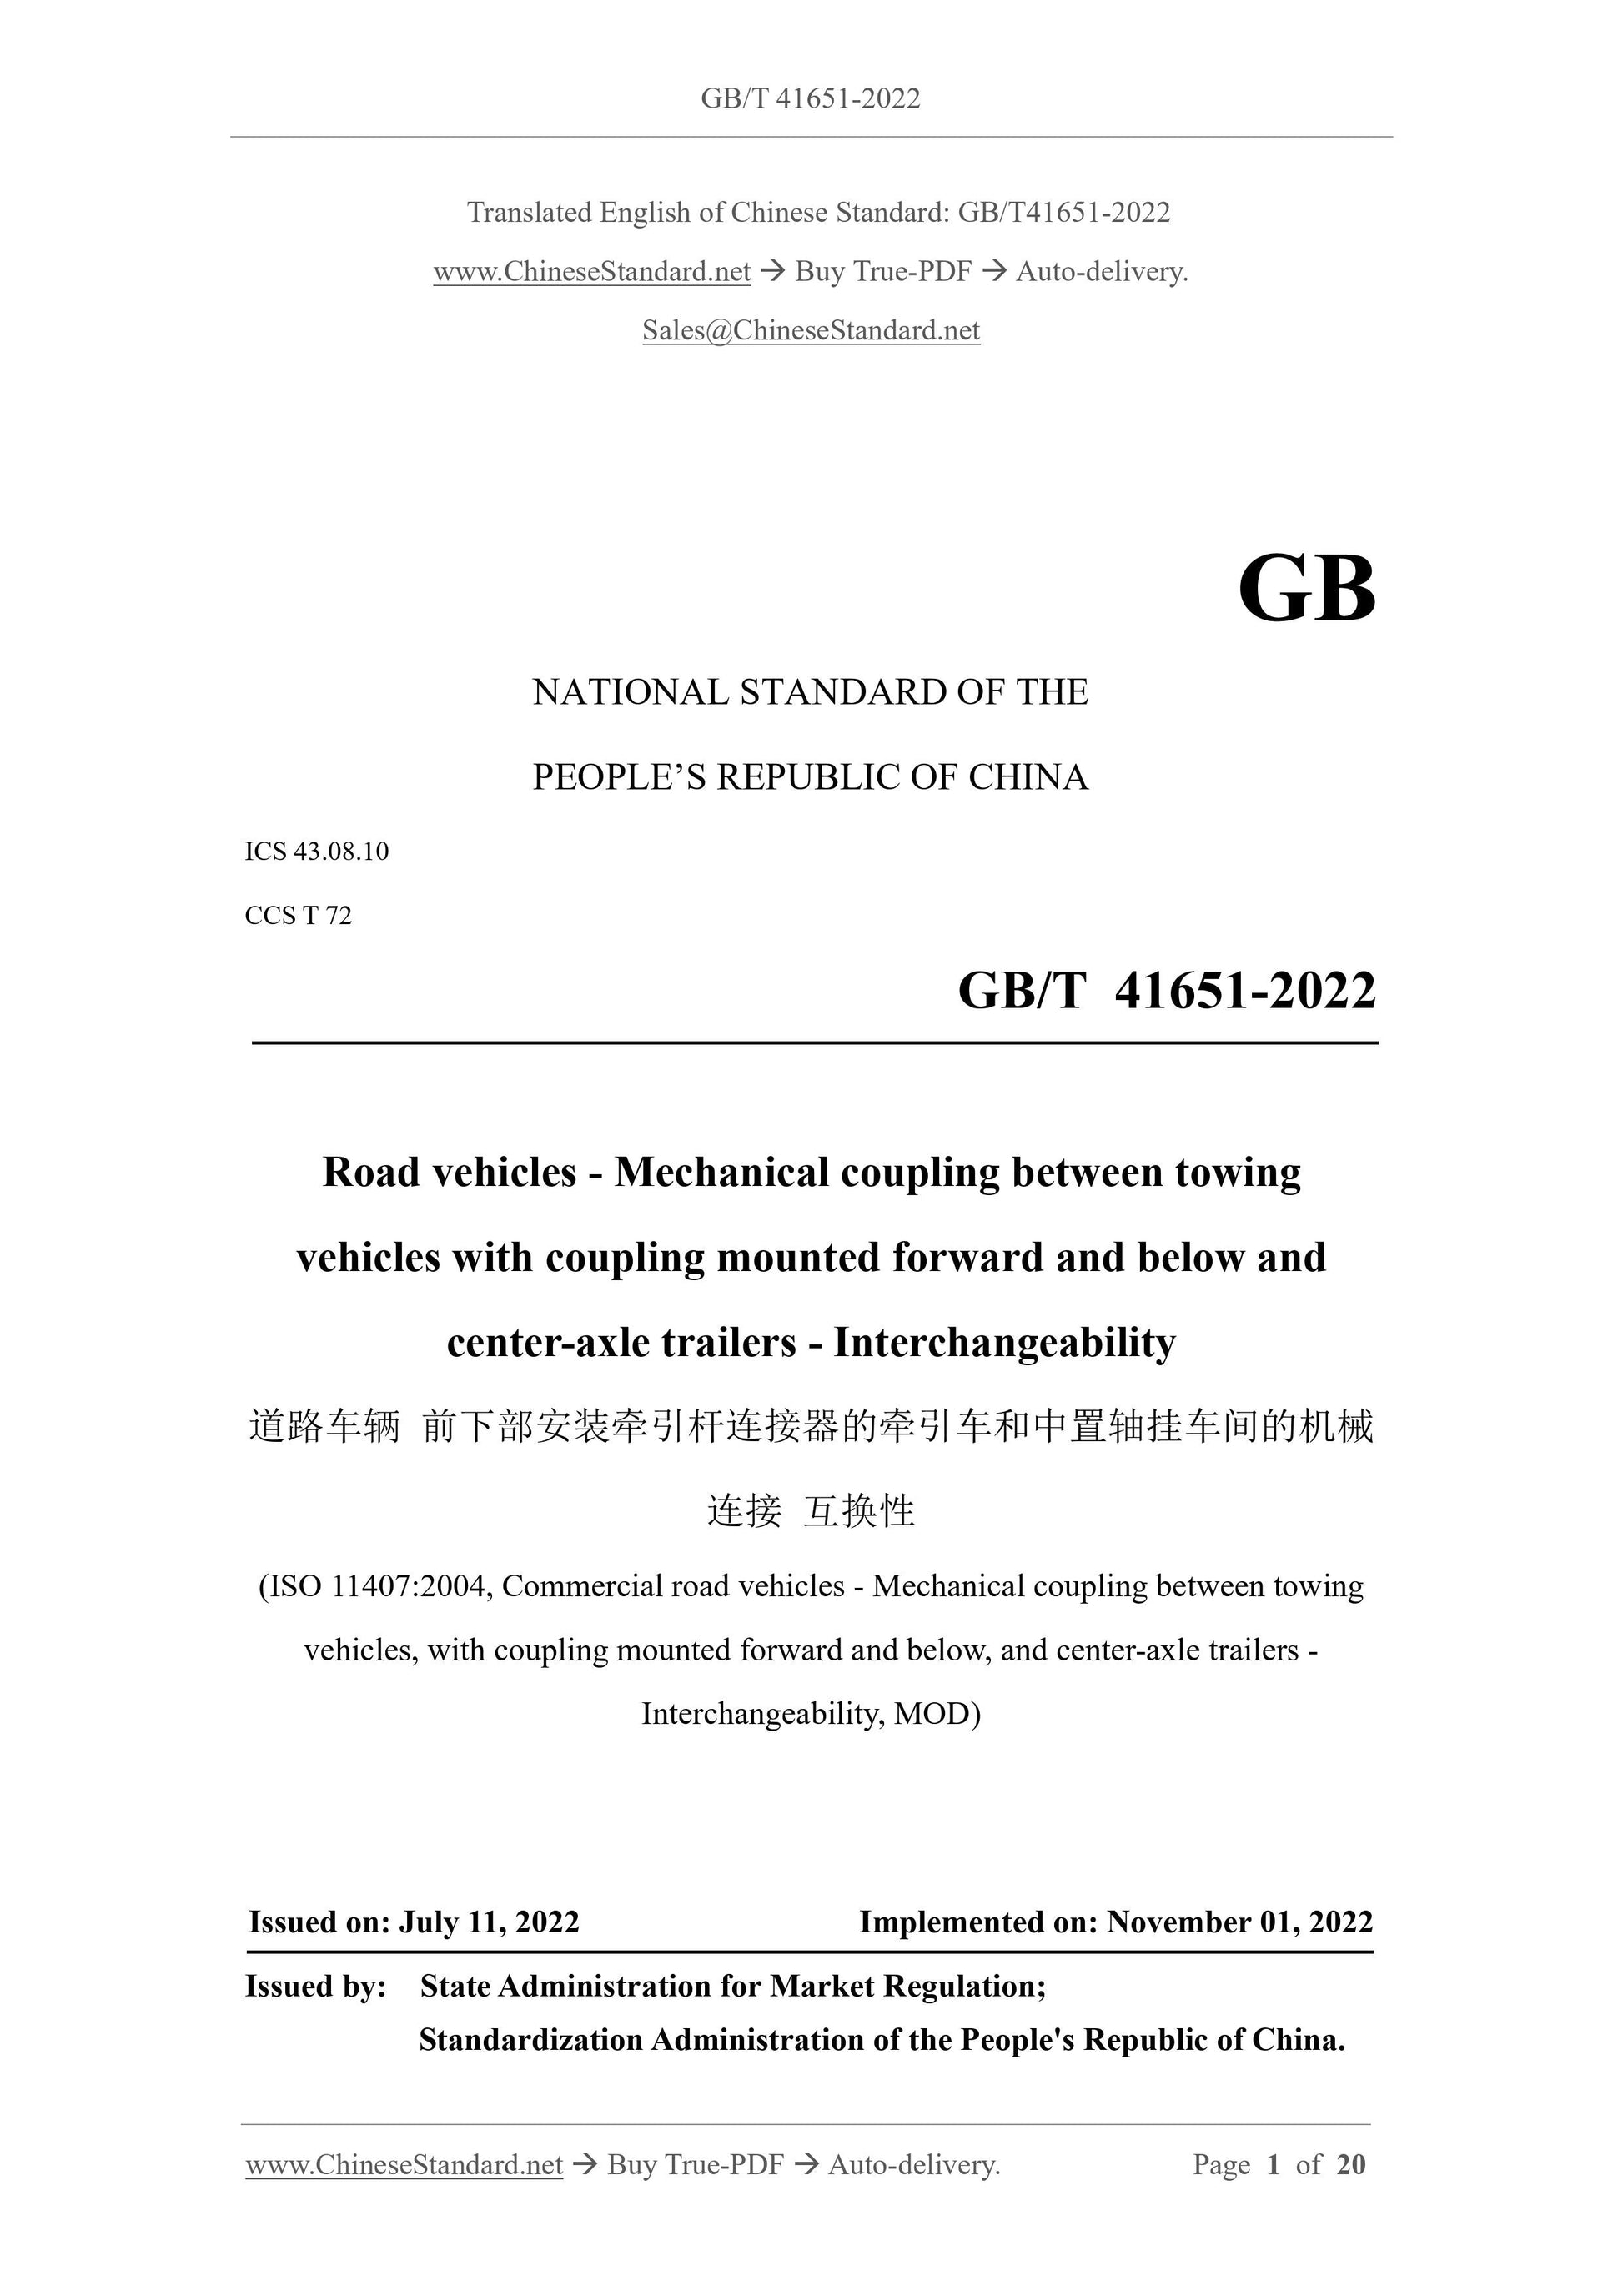 GB/T 41651-2022 Page 1